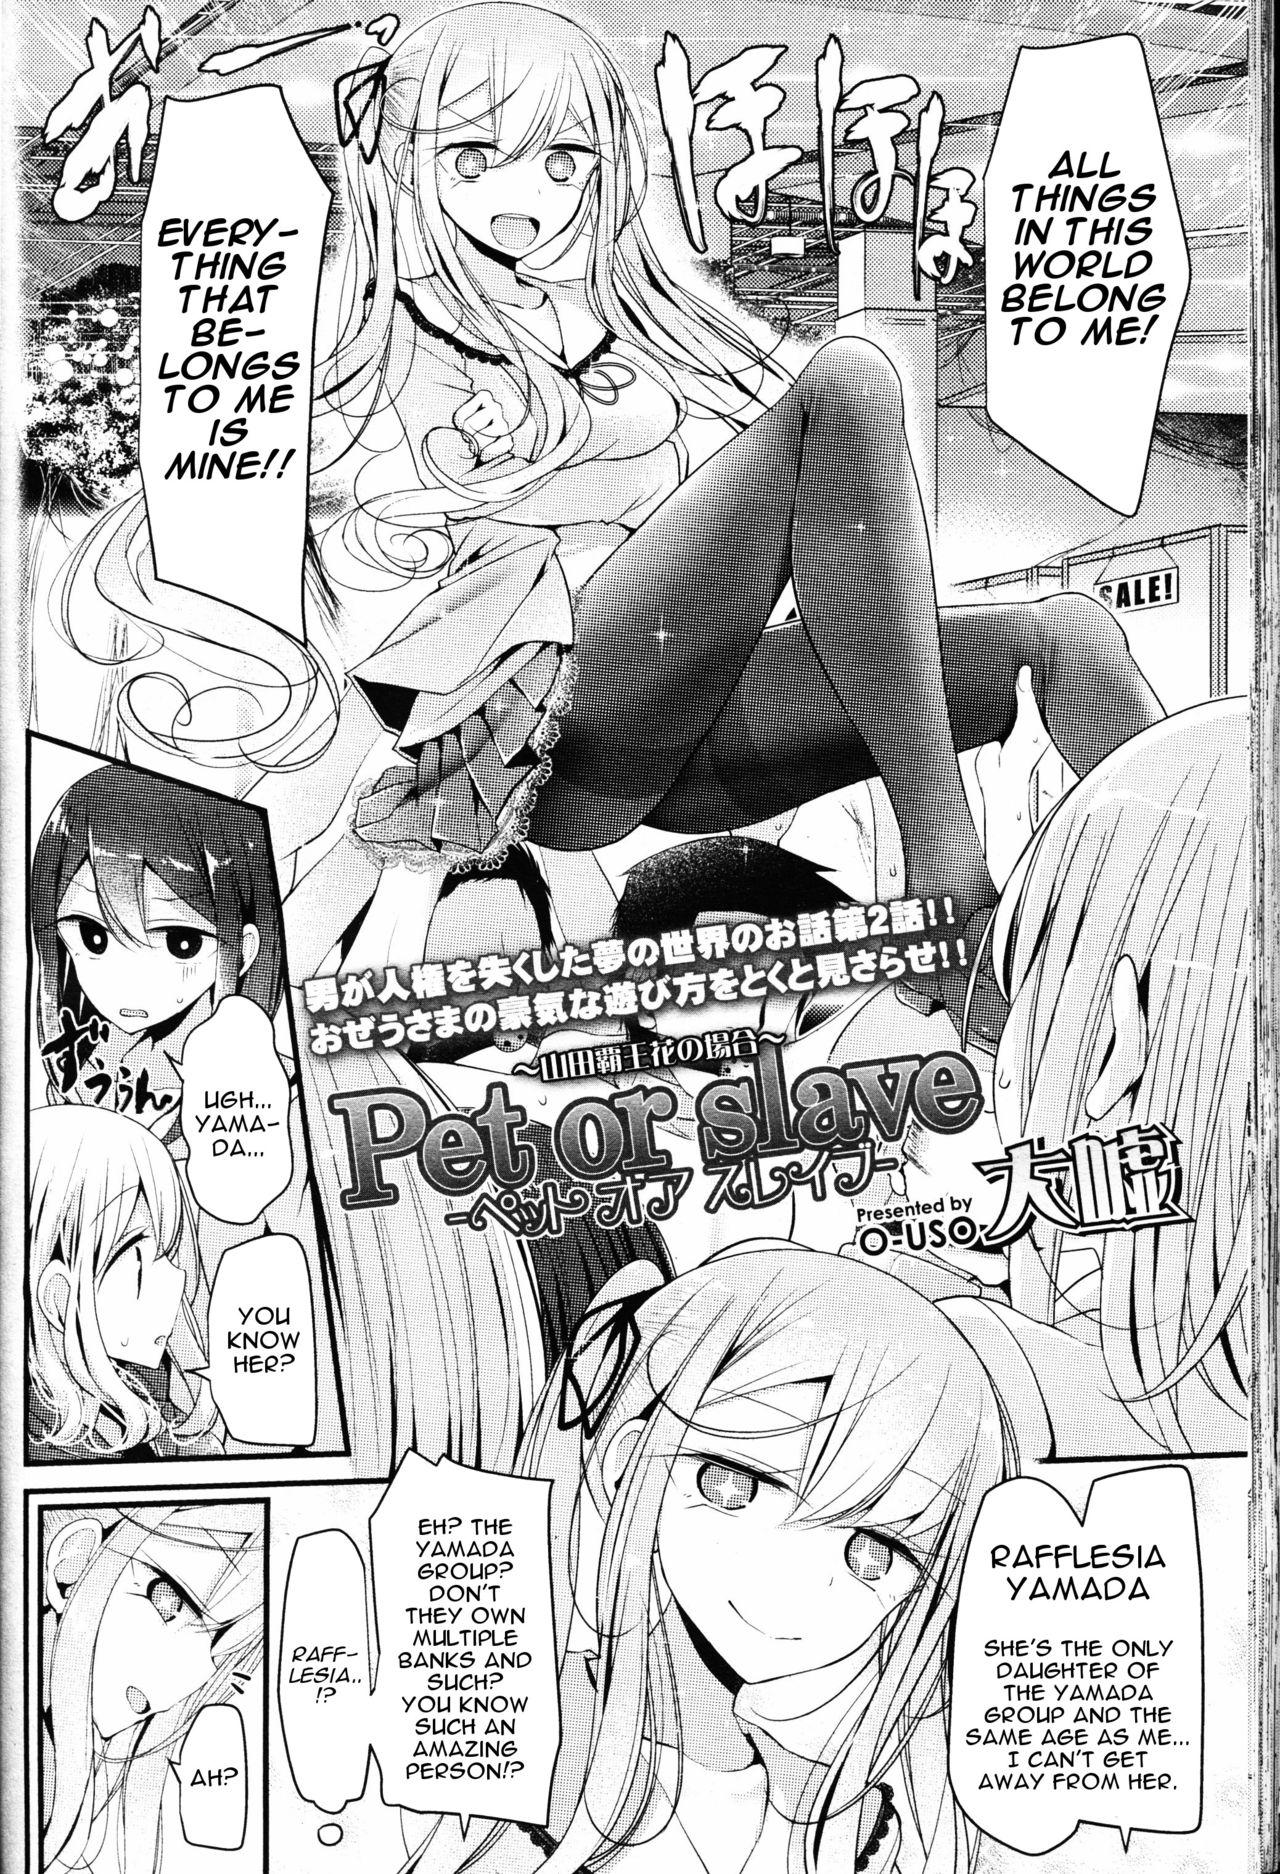 Pick Up [Oouso] Pet or Slave - Yamada Rafflesia no Baai | Pet or Slave - The Case of Rafflesia Yamada (Girls forM Vol. 12) [English] [sneikkimies] Pussy Eating - Page 2